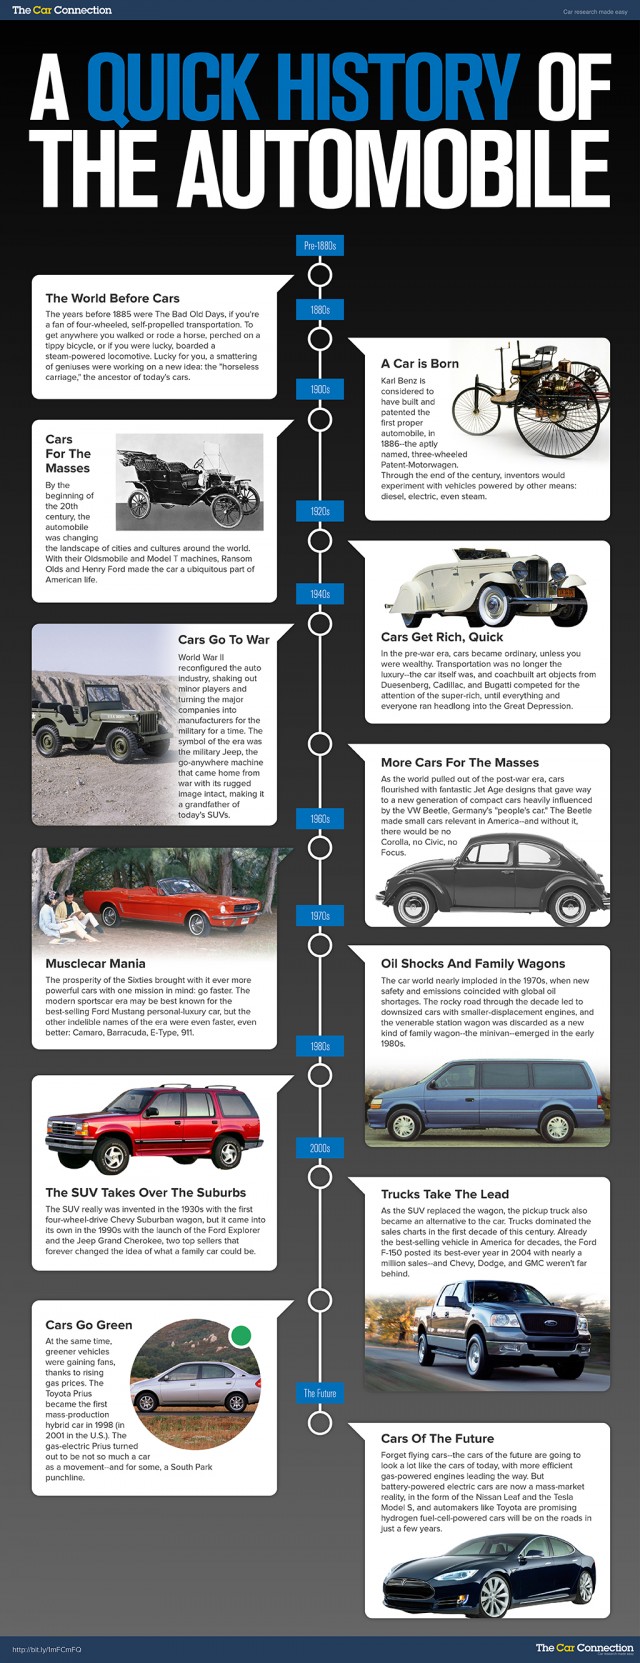 A Quick History Of The Automobile infographic